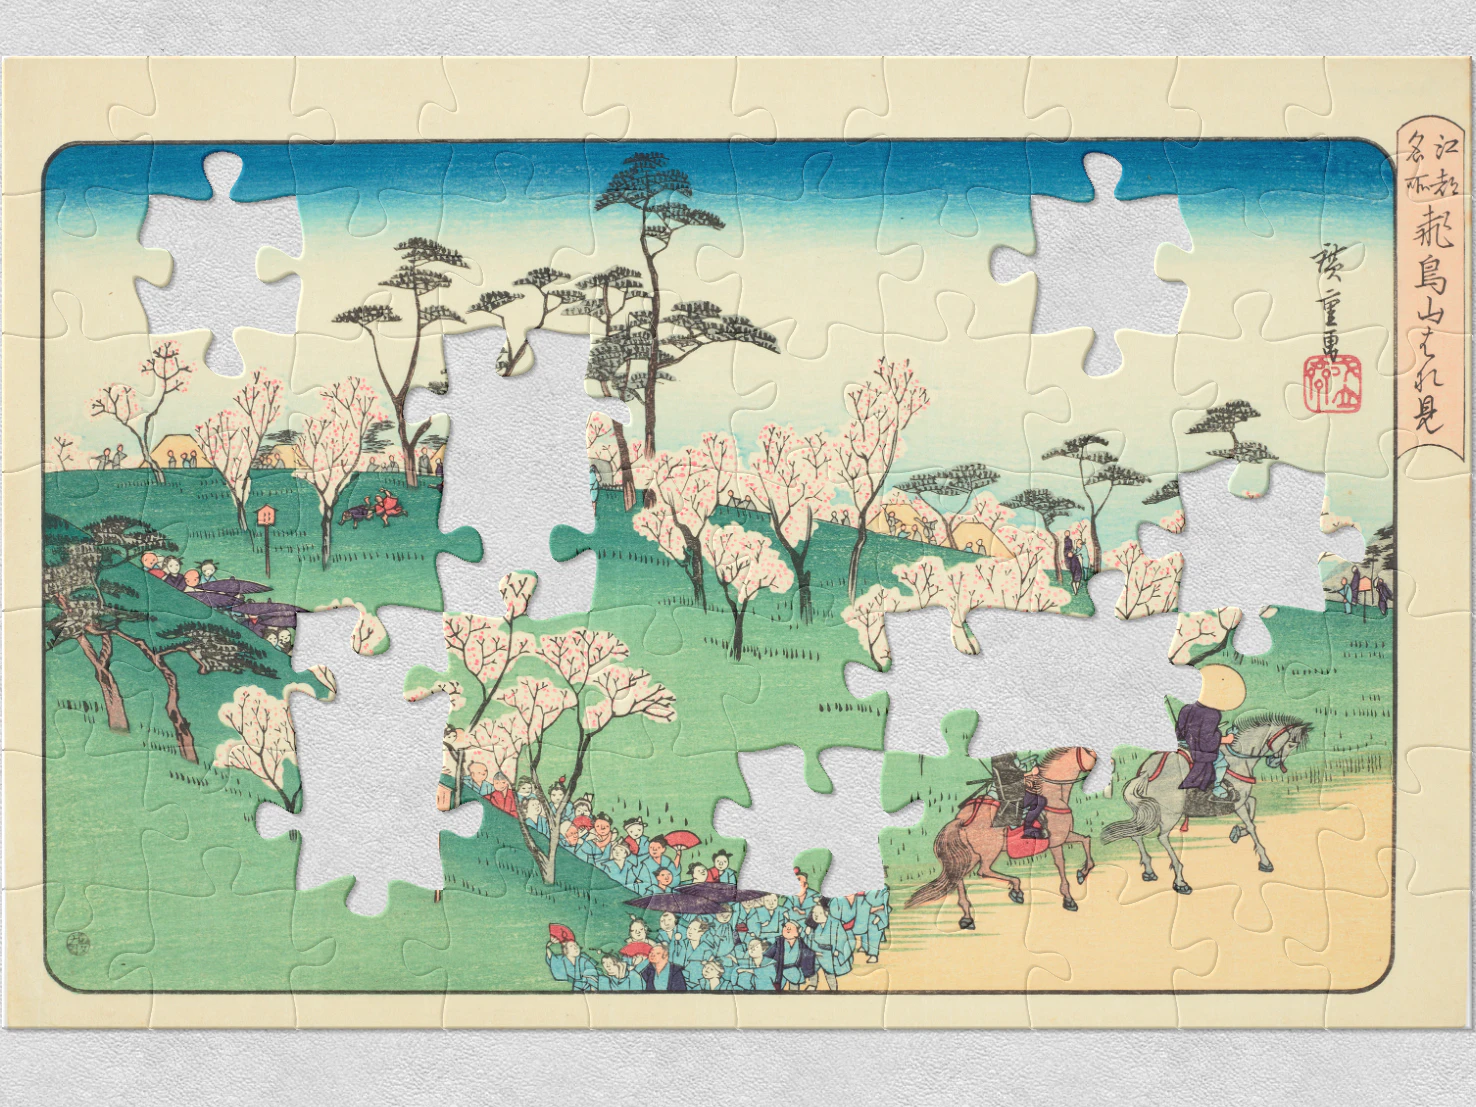 A colourful Japanese woodblock print depicting people walking in cherry blossom trees